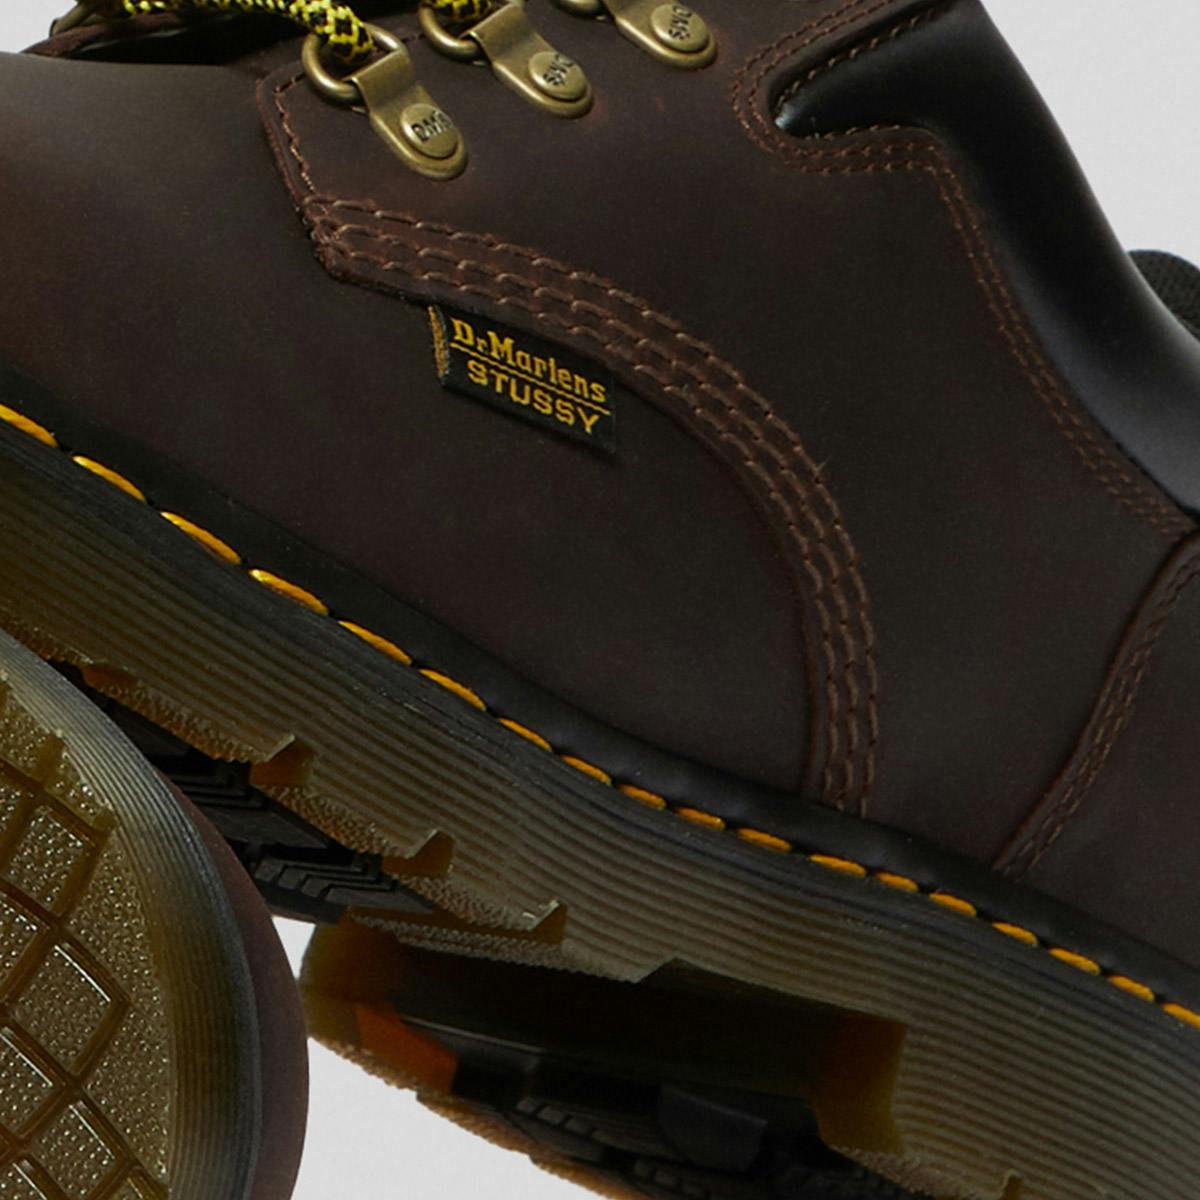 Dr. Martens x Stüssy 8053 HY Boot - Register Now on END. (Global) Launches  | END. (Global)